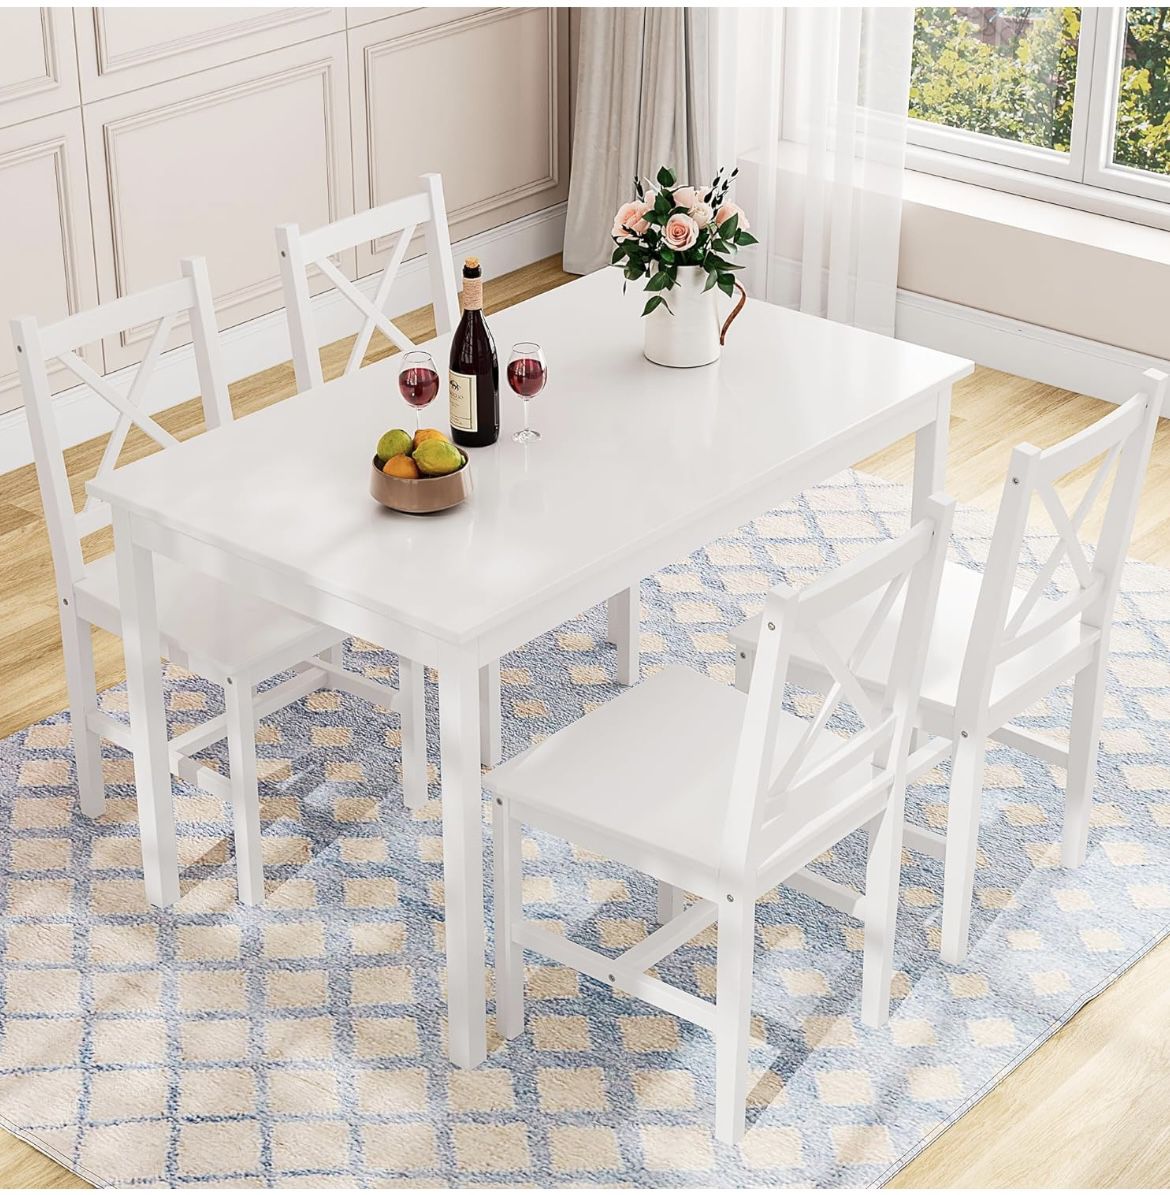 DELICATE 5 Piece Kitchen Table Set with 4 Chairs Pine Wood (White)